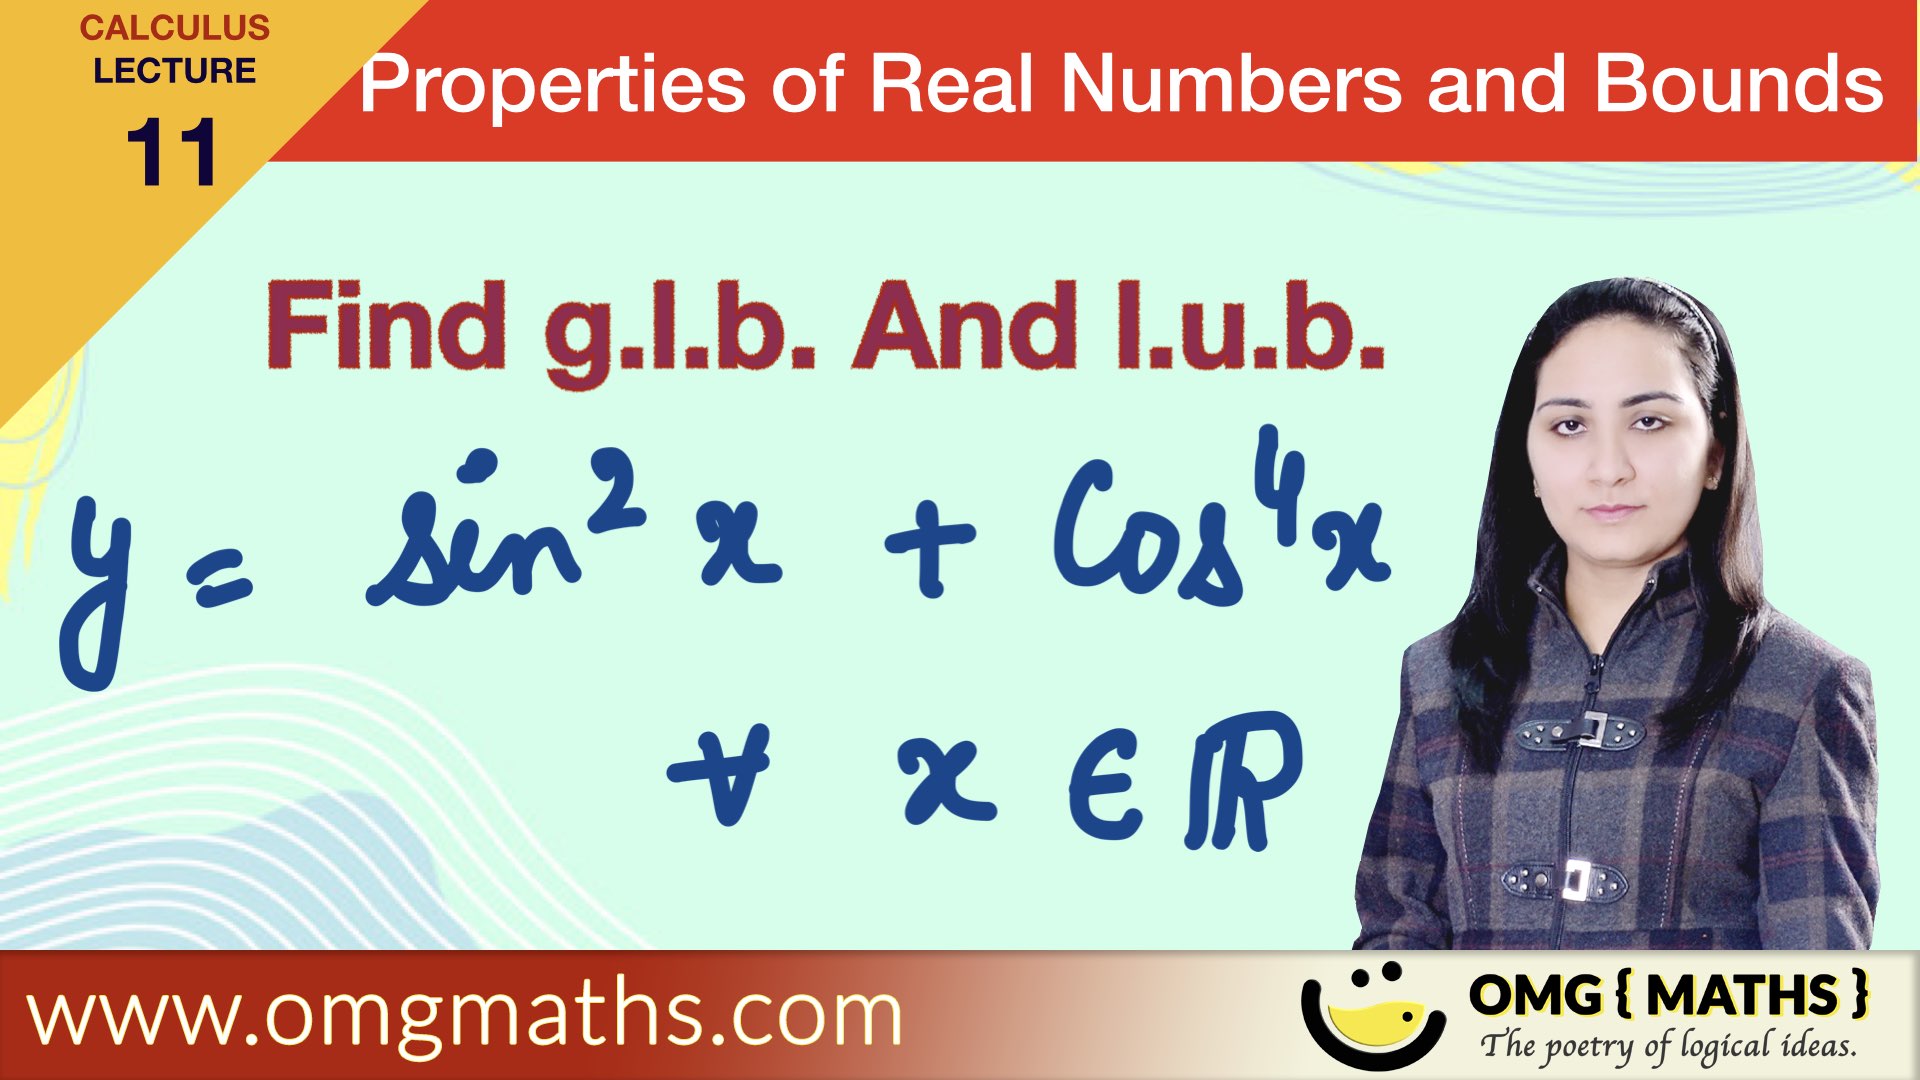 find glb and lub examples pdf | find supremum and infimum value